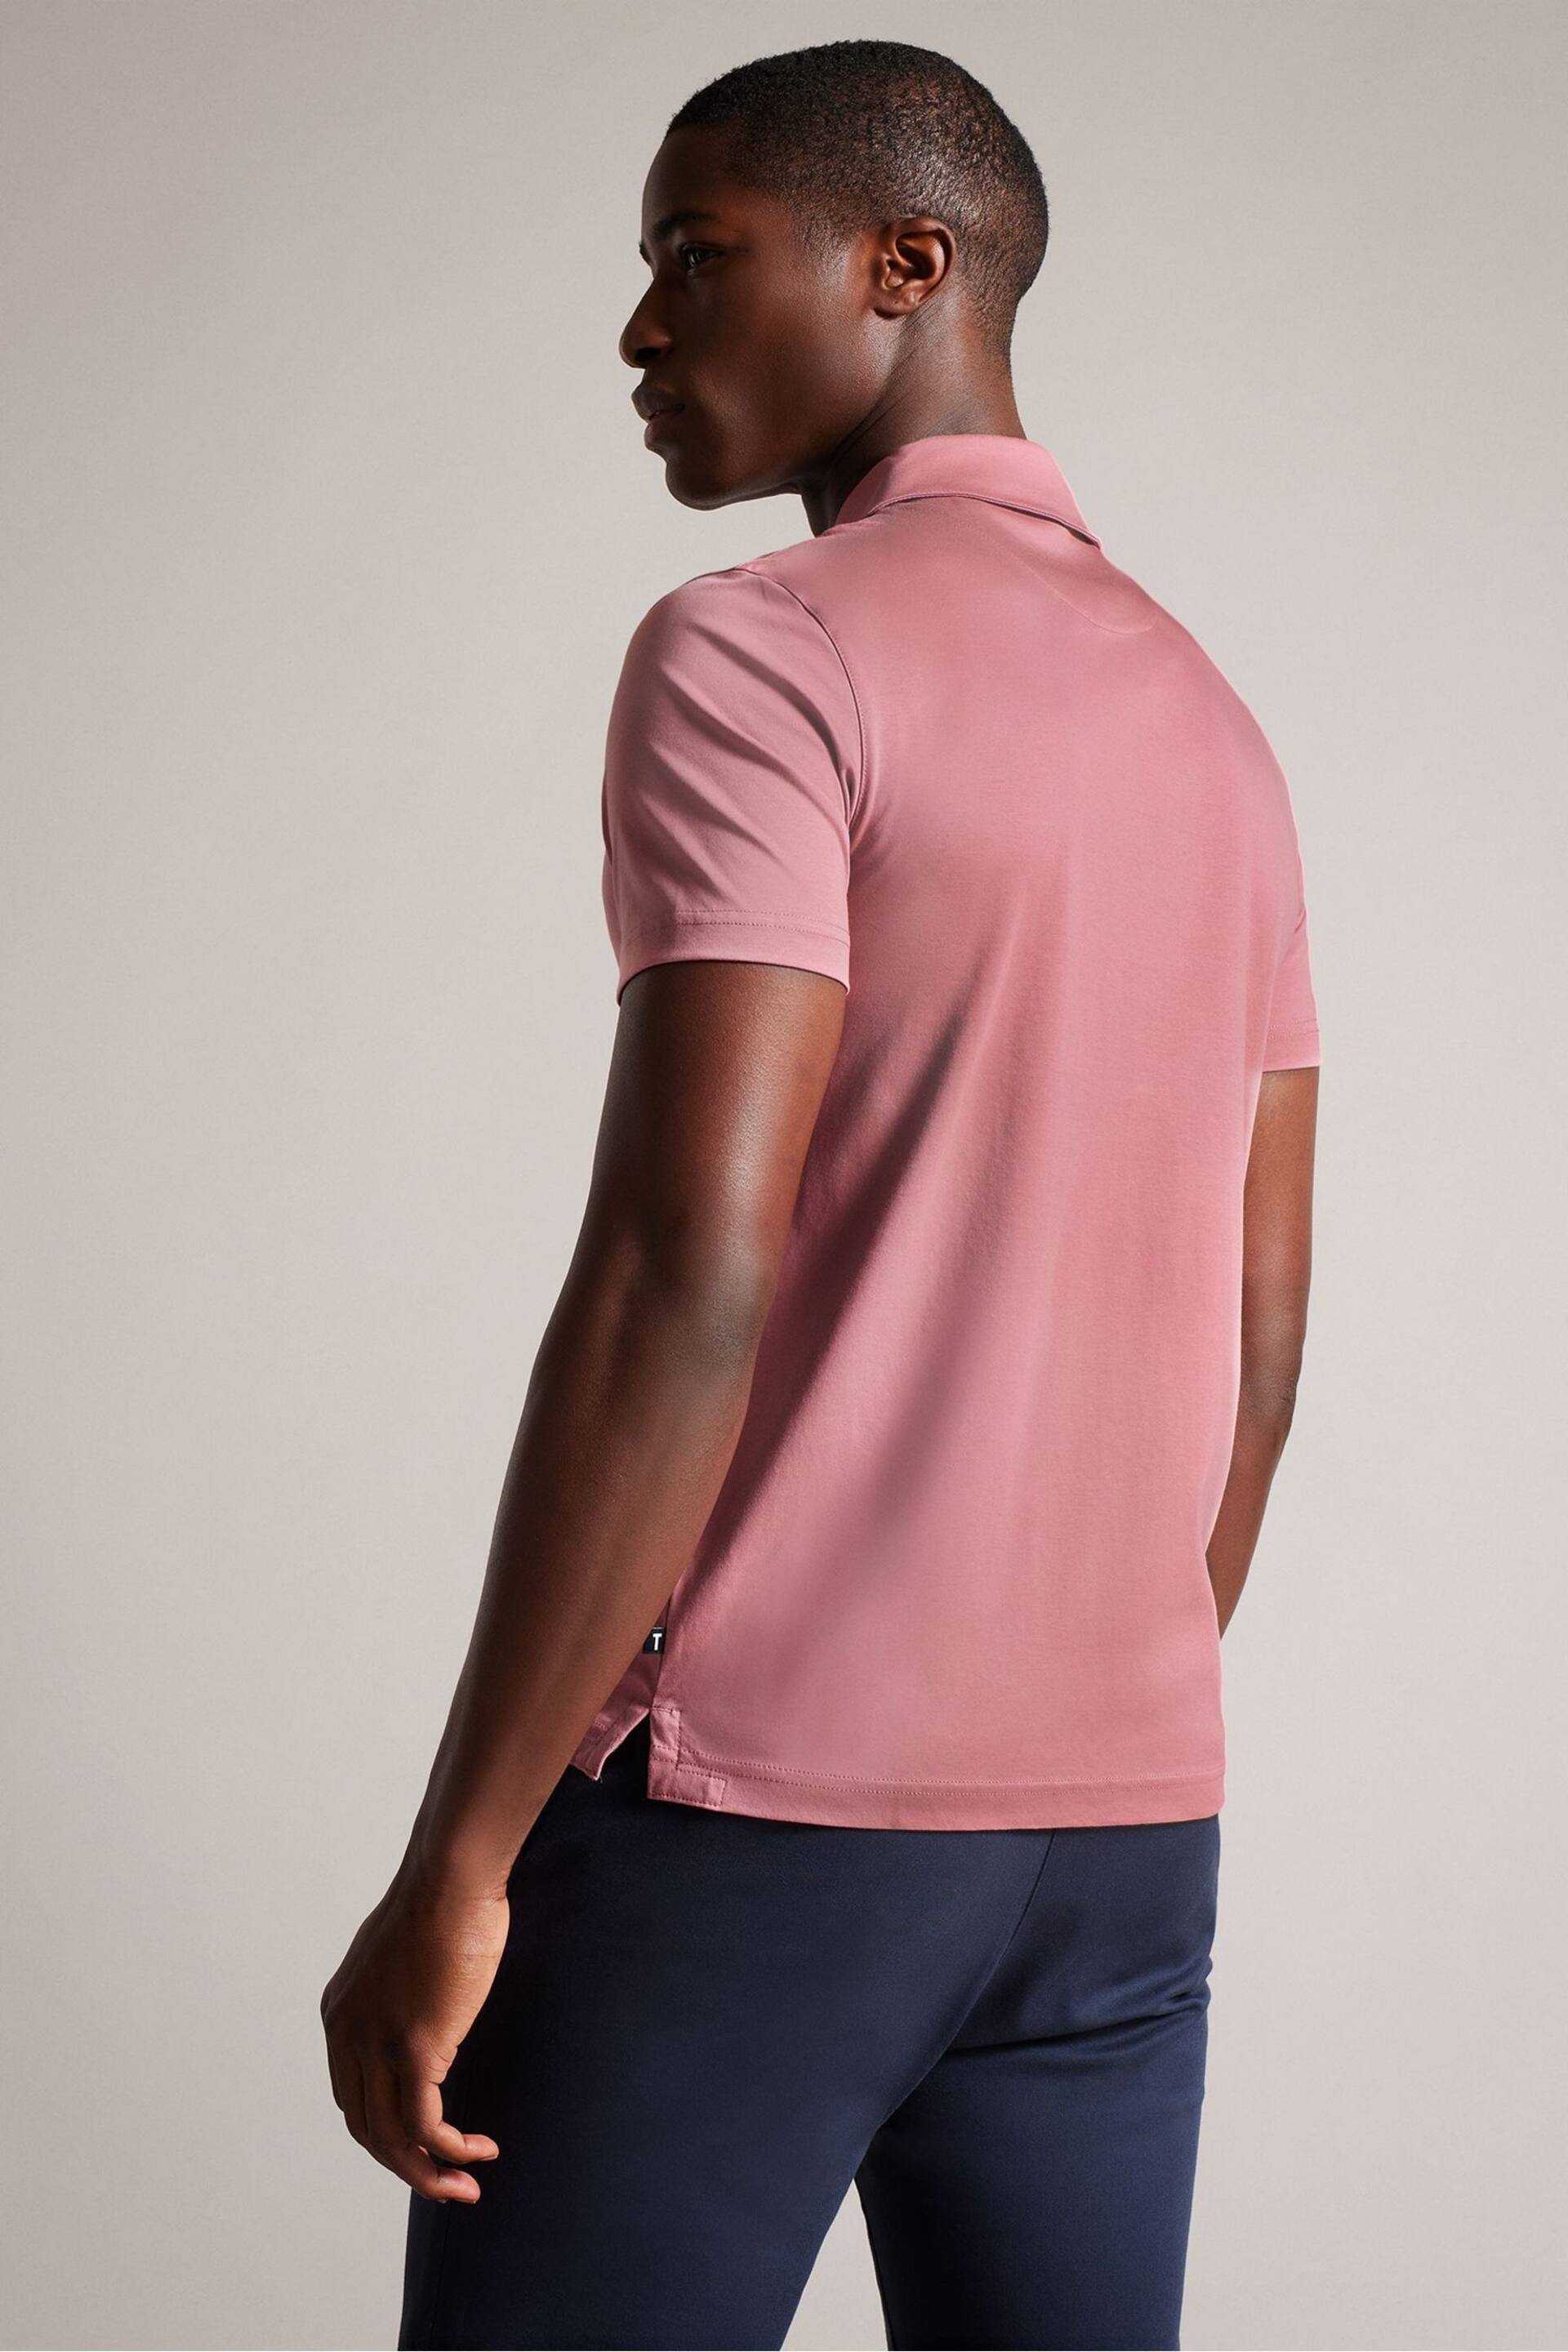 Ted Baker Pink Slim Zeiter Soft Touch Polo Shirt - Image 2 of 5